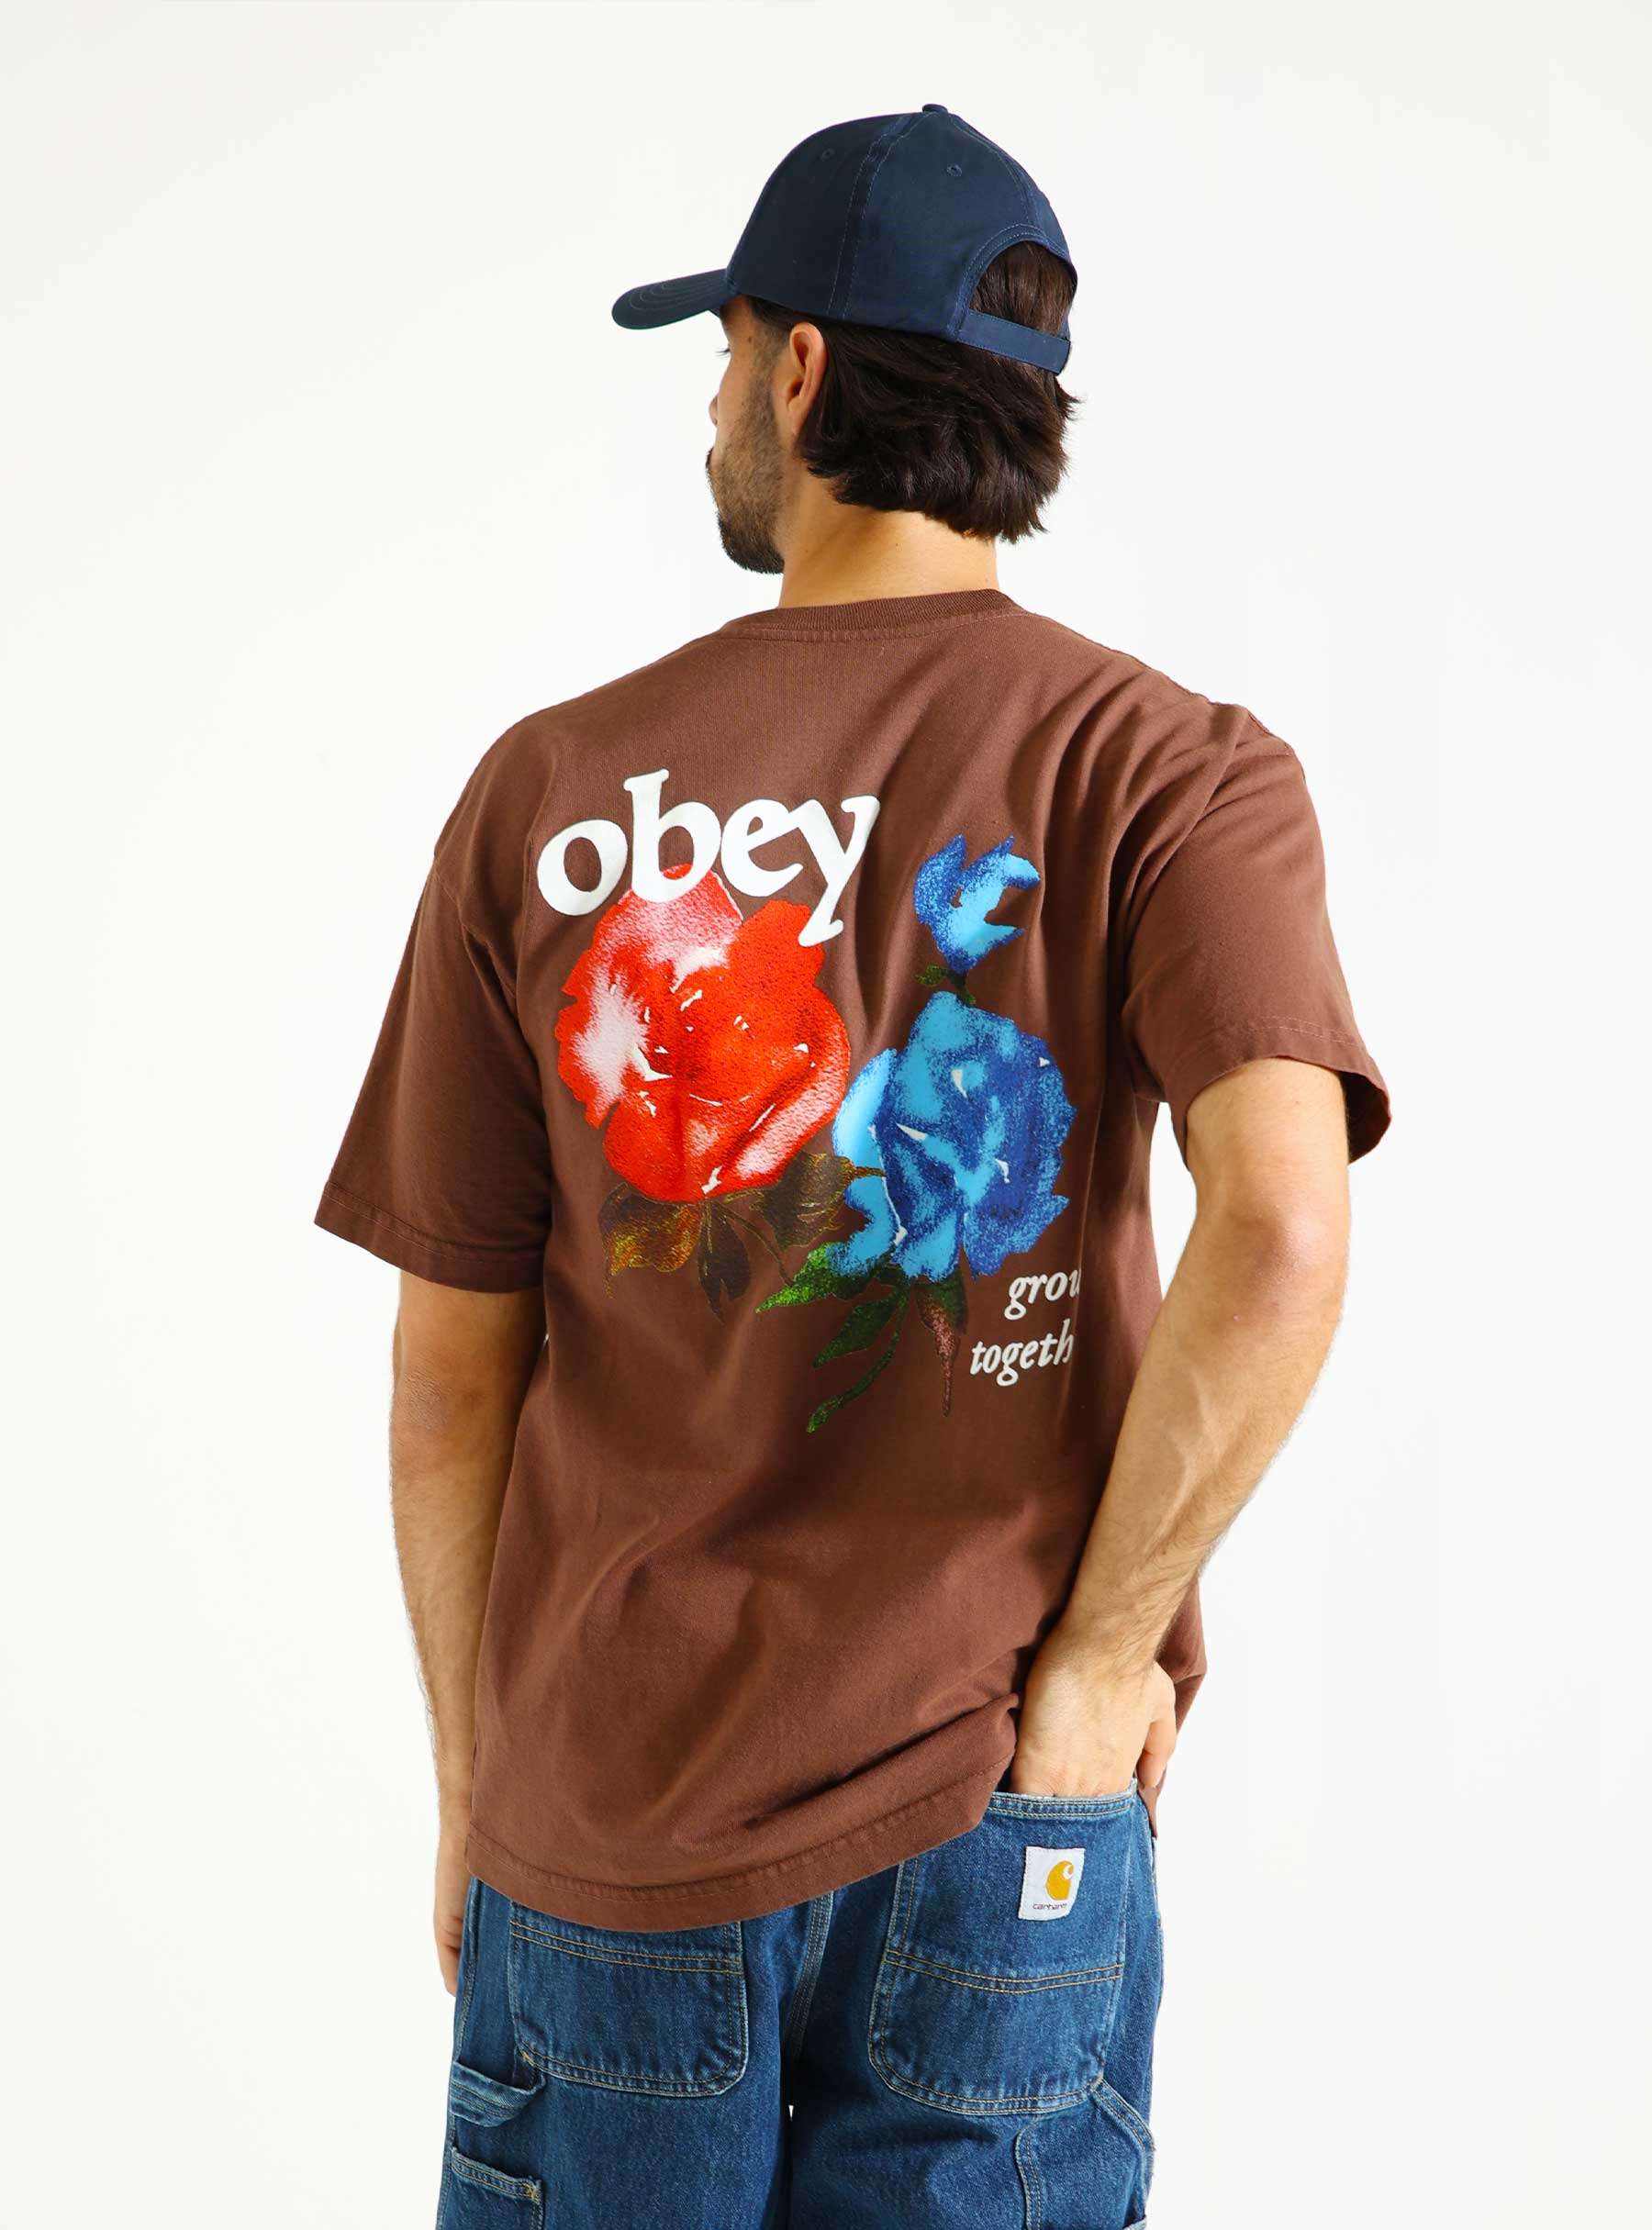 Obey Grow Together T-Shirt Sepia 166913718-SEP